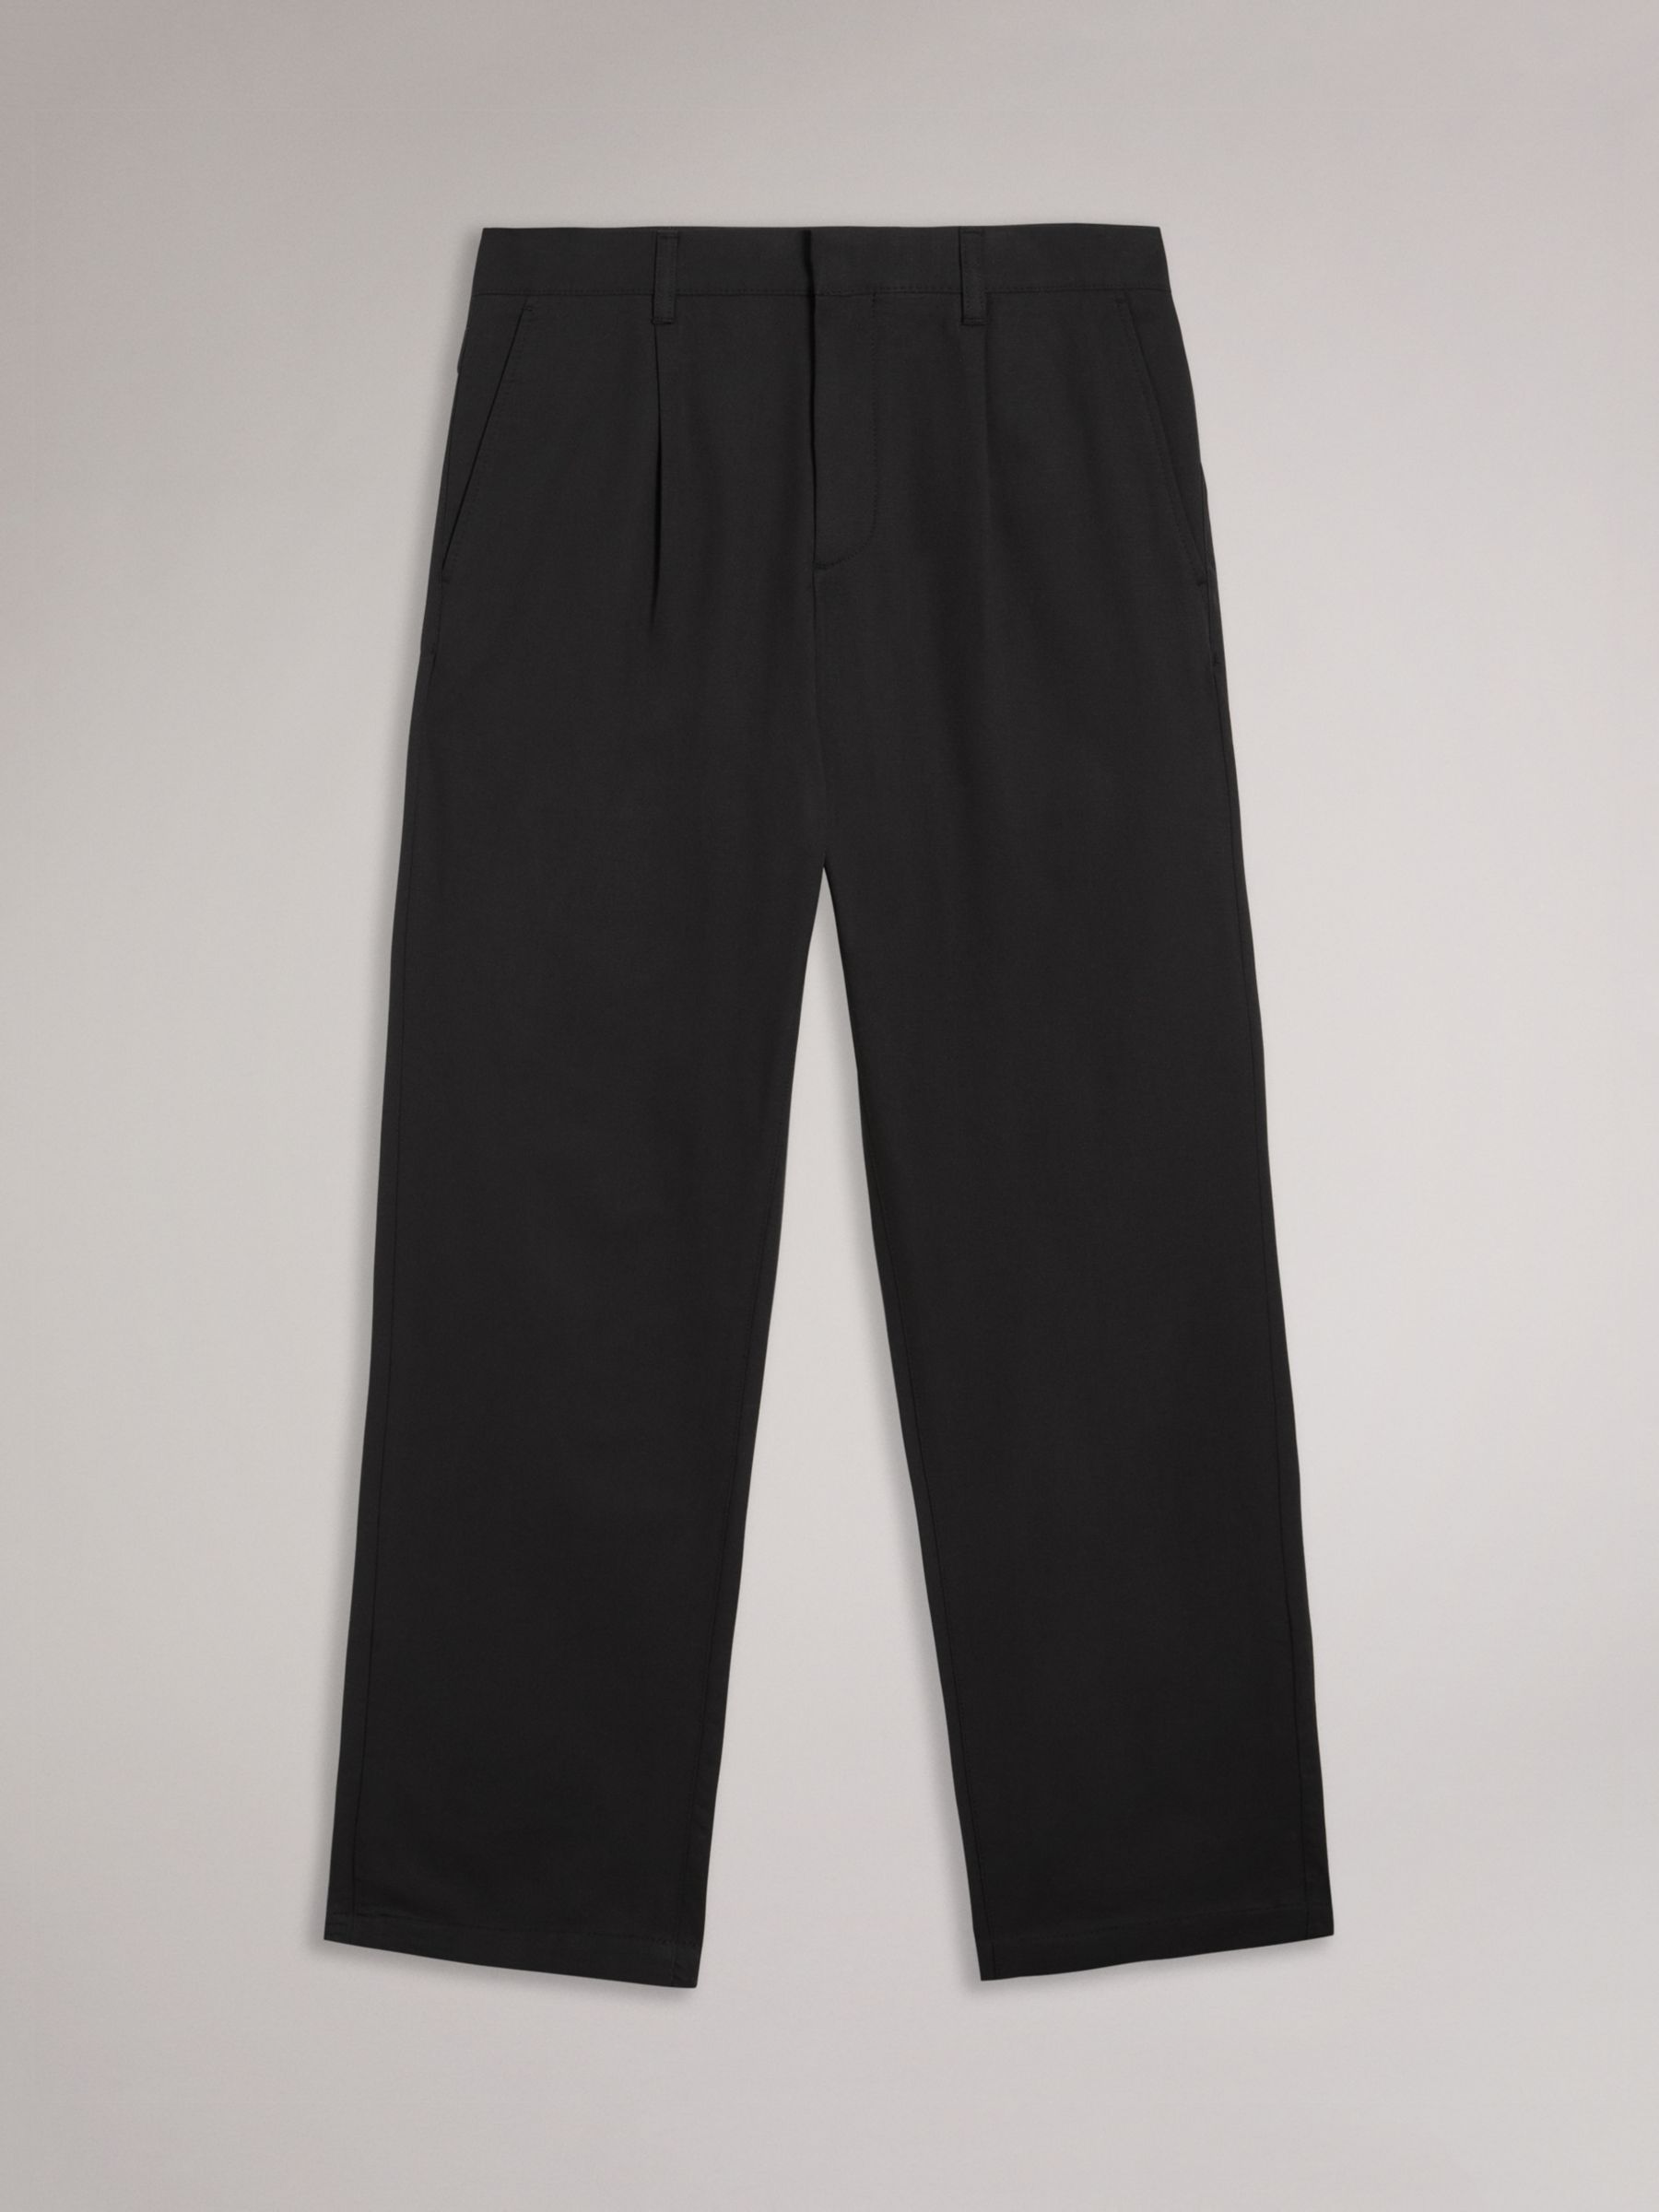 Ted Baker Vedra Tailored Trousers, Black, 28R